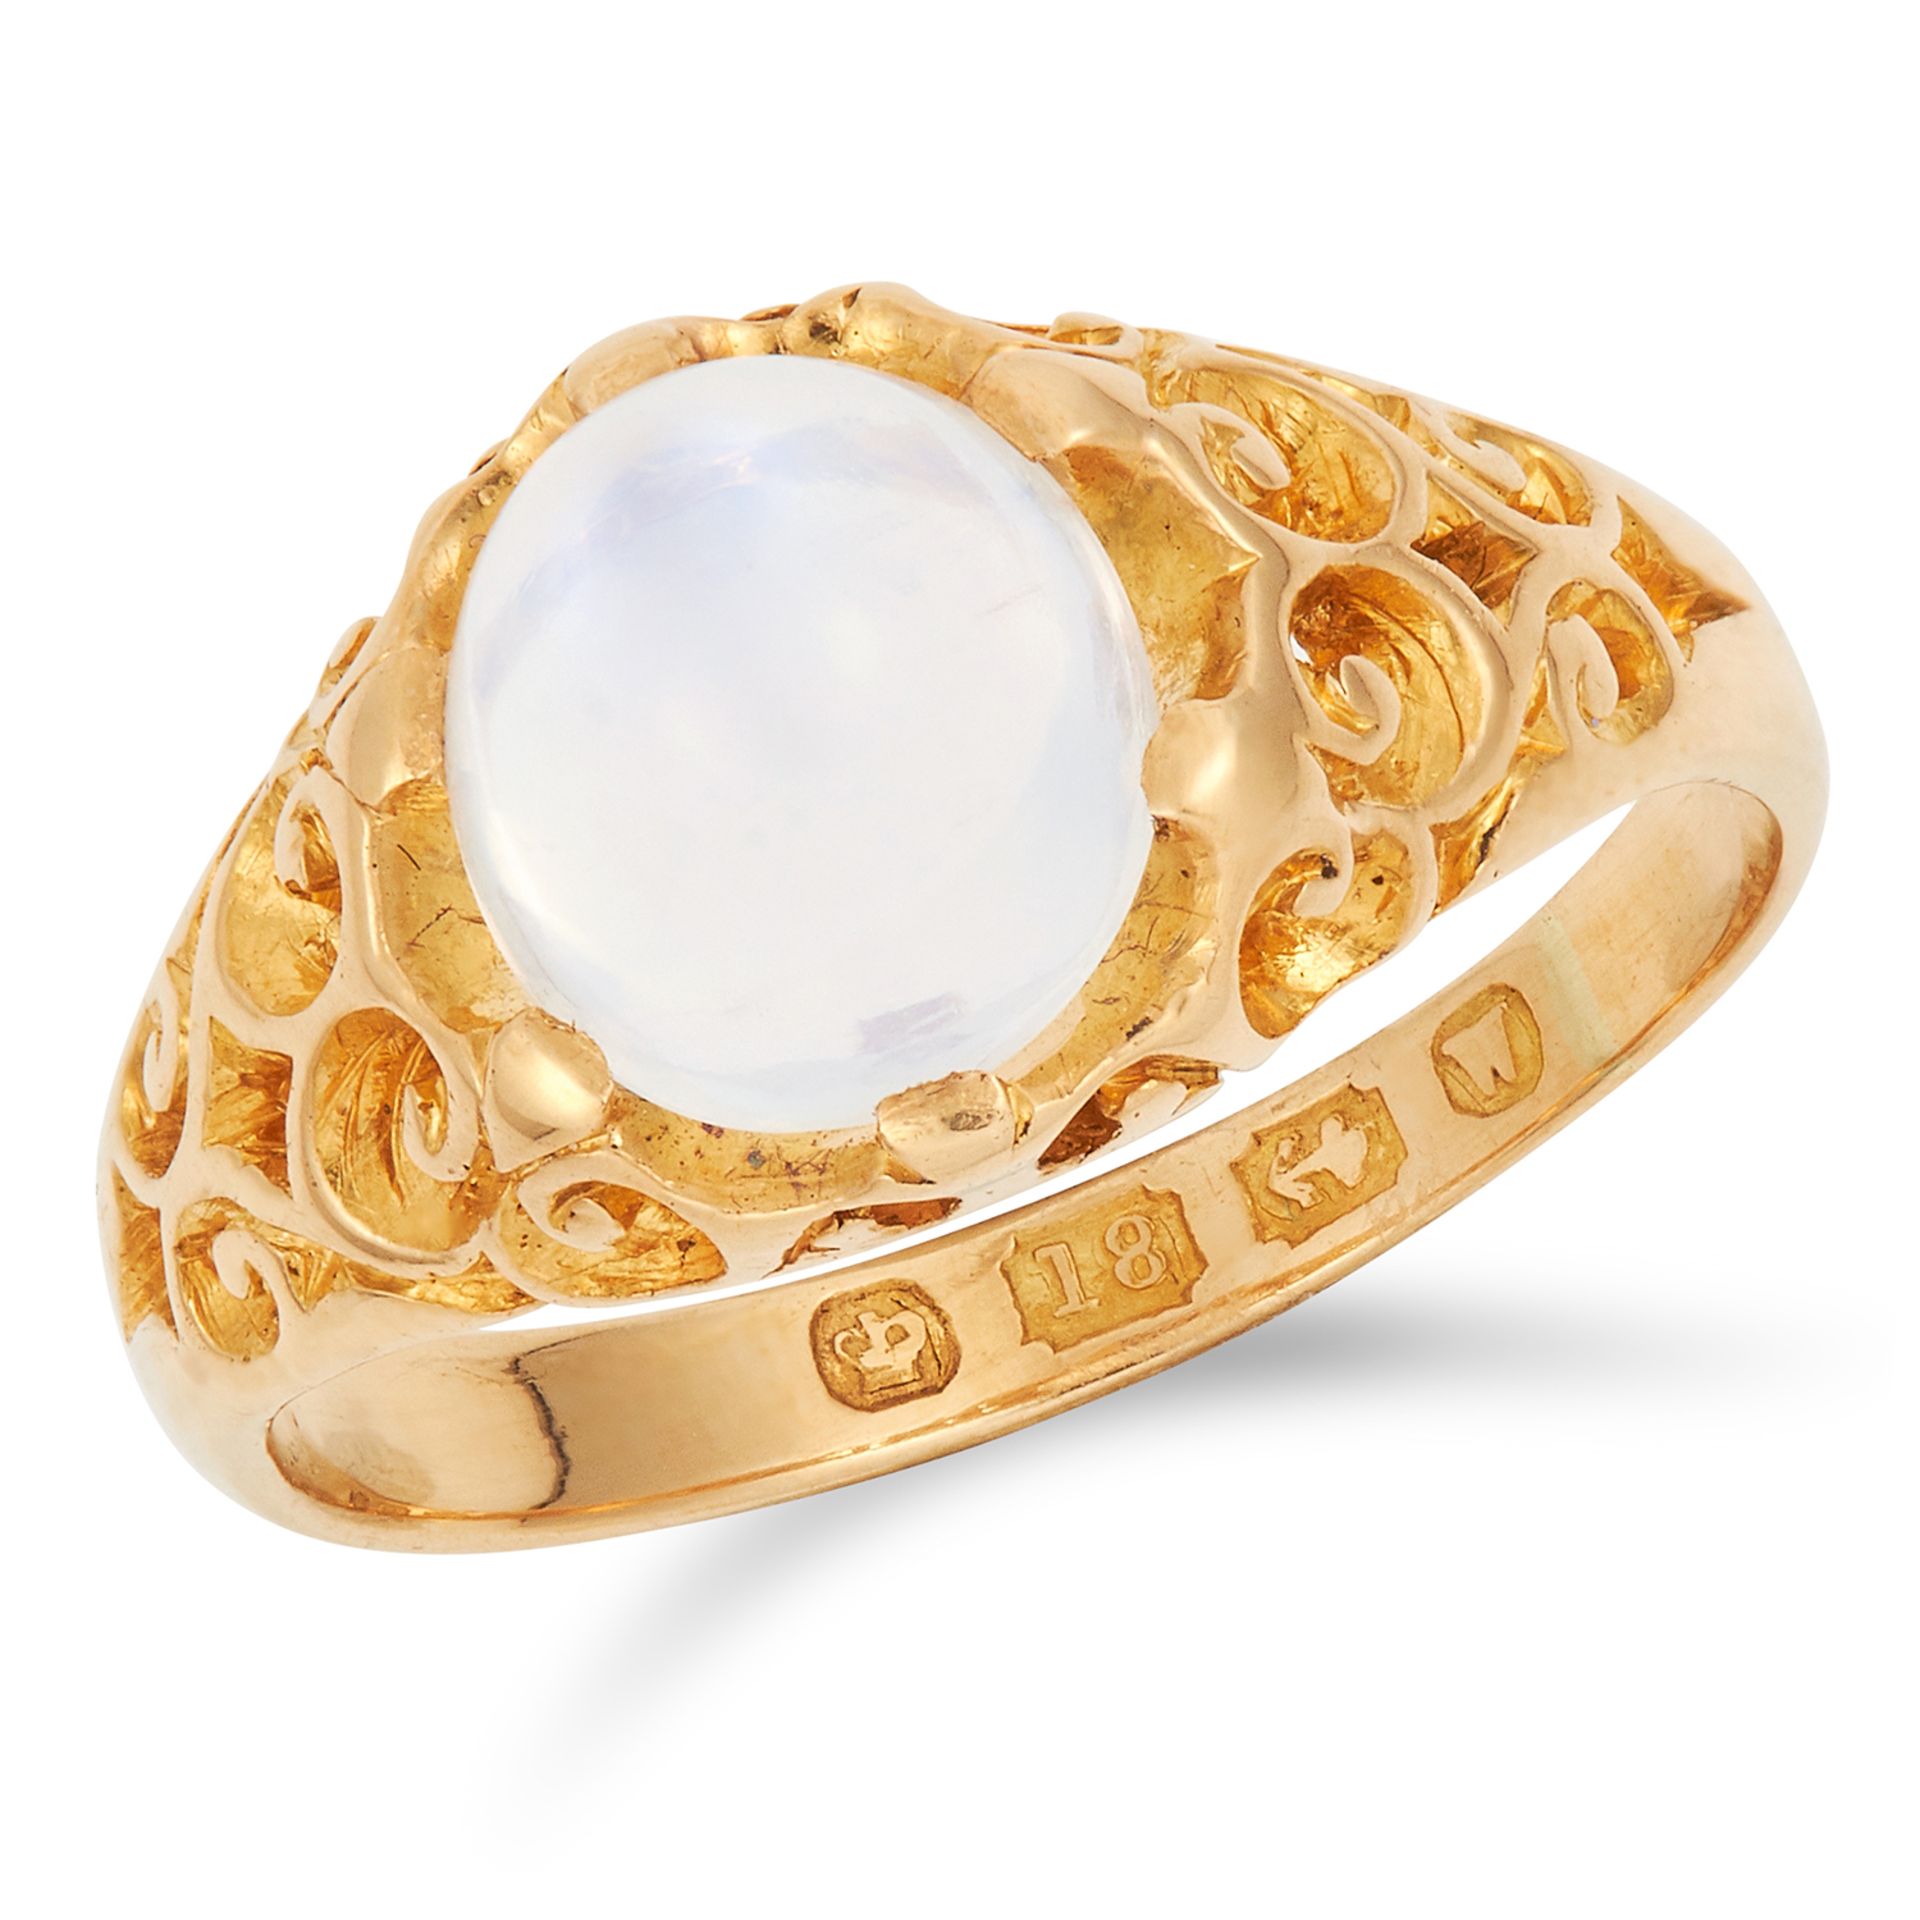 ANTIQUE MOONSTONE DRESS RING set with a cabochon moonstone of approximately 2.86 carats, size L / 6,